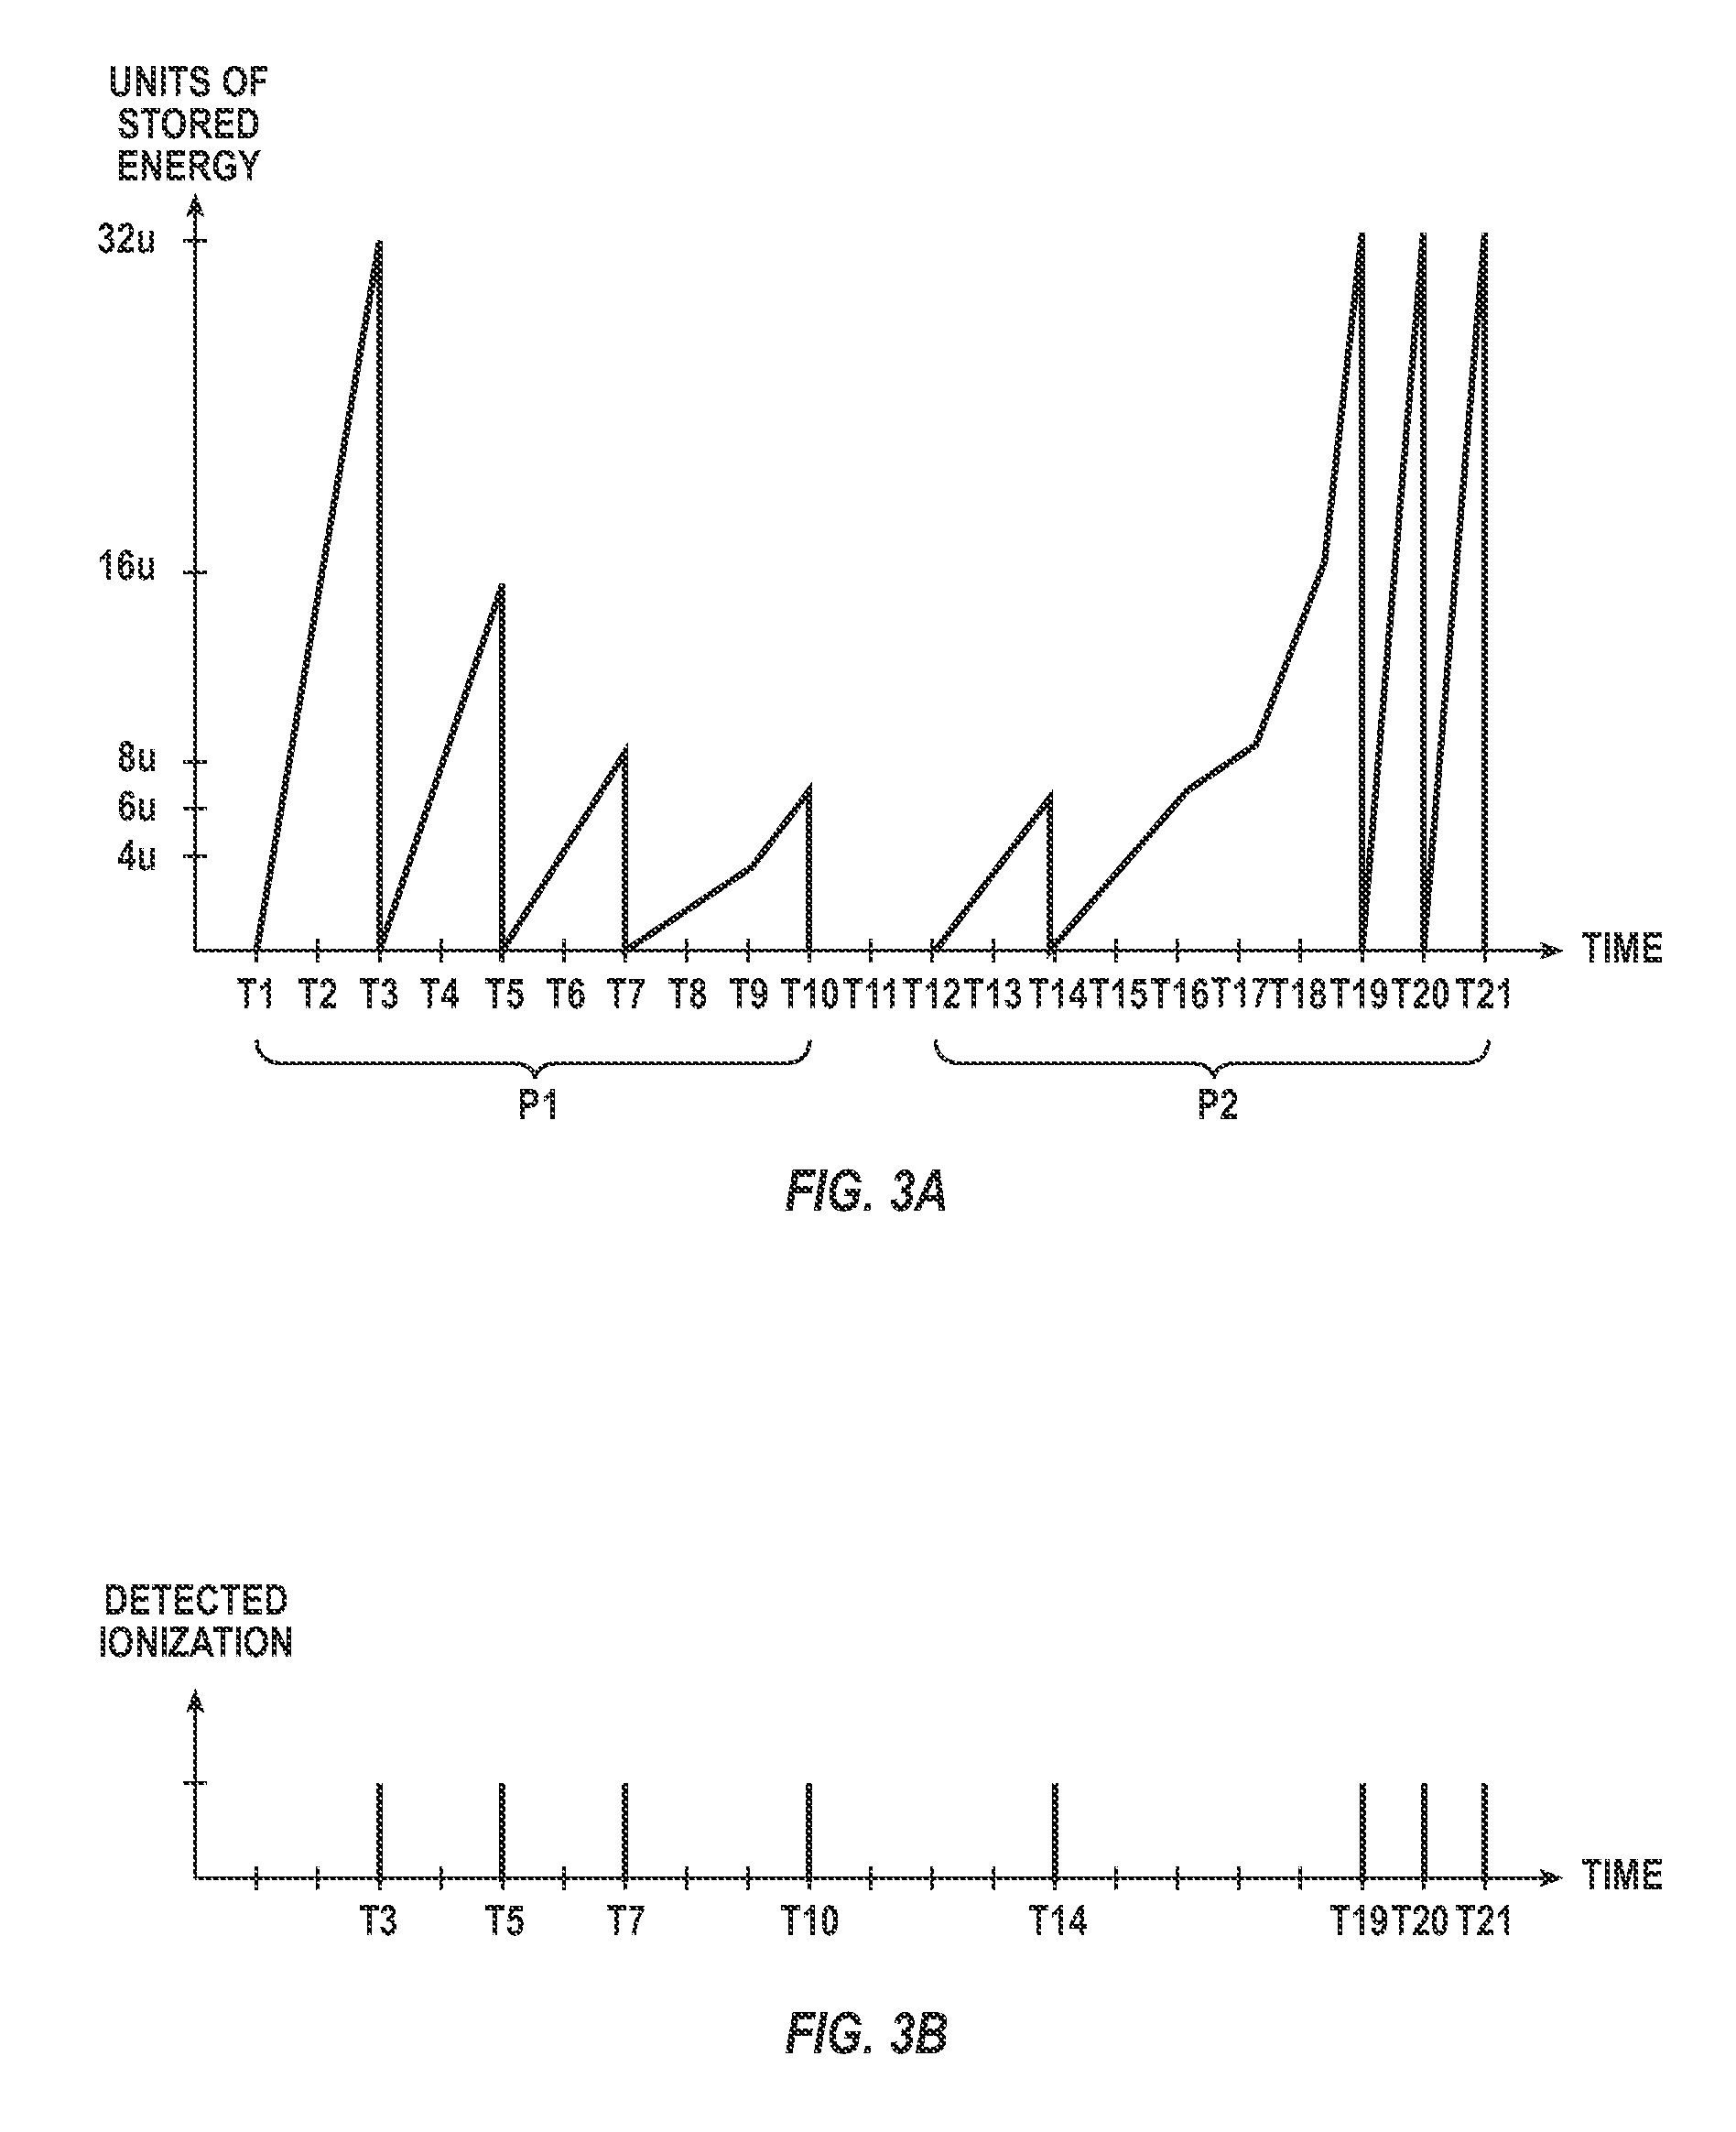 Systems and methods for arc energy regulation and pulse delivery